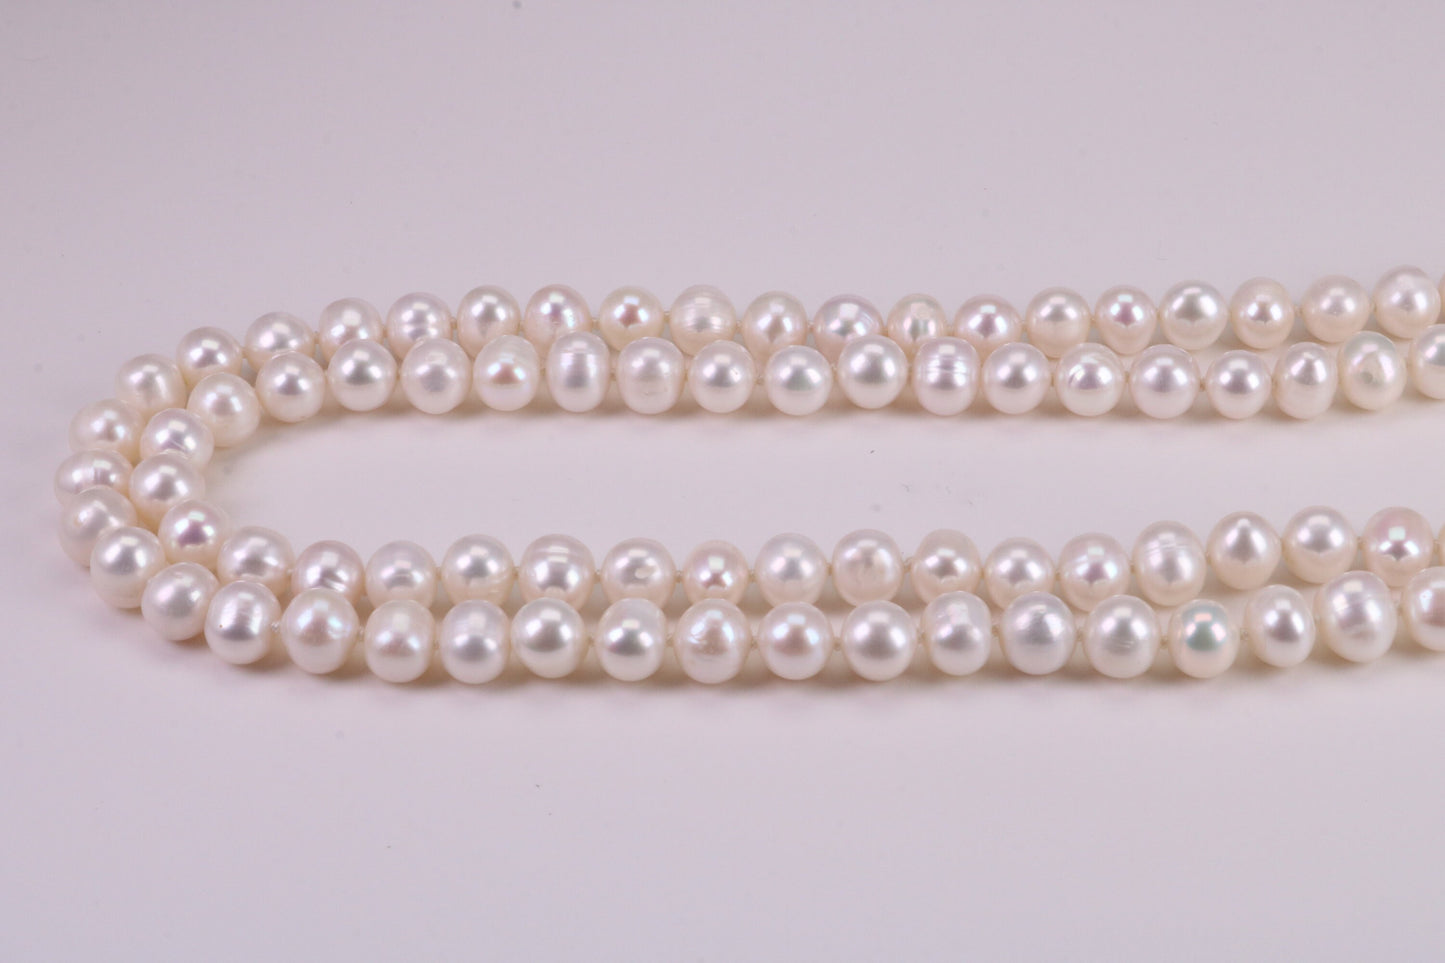 Two Strand Natural 8 mm Round Pearl Necklace set in Silver, Two Strands Measures 18 and 20 inches Long